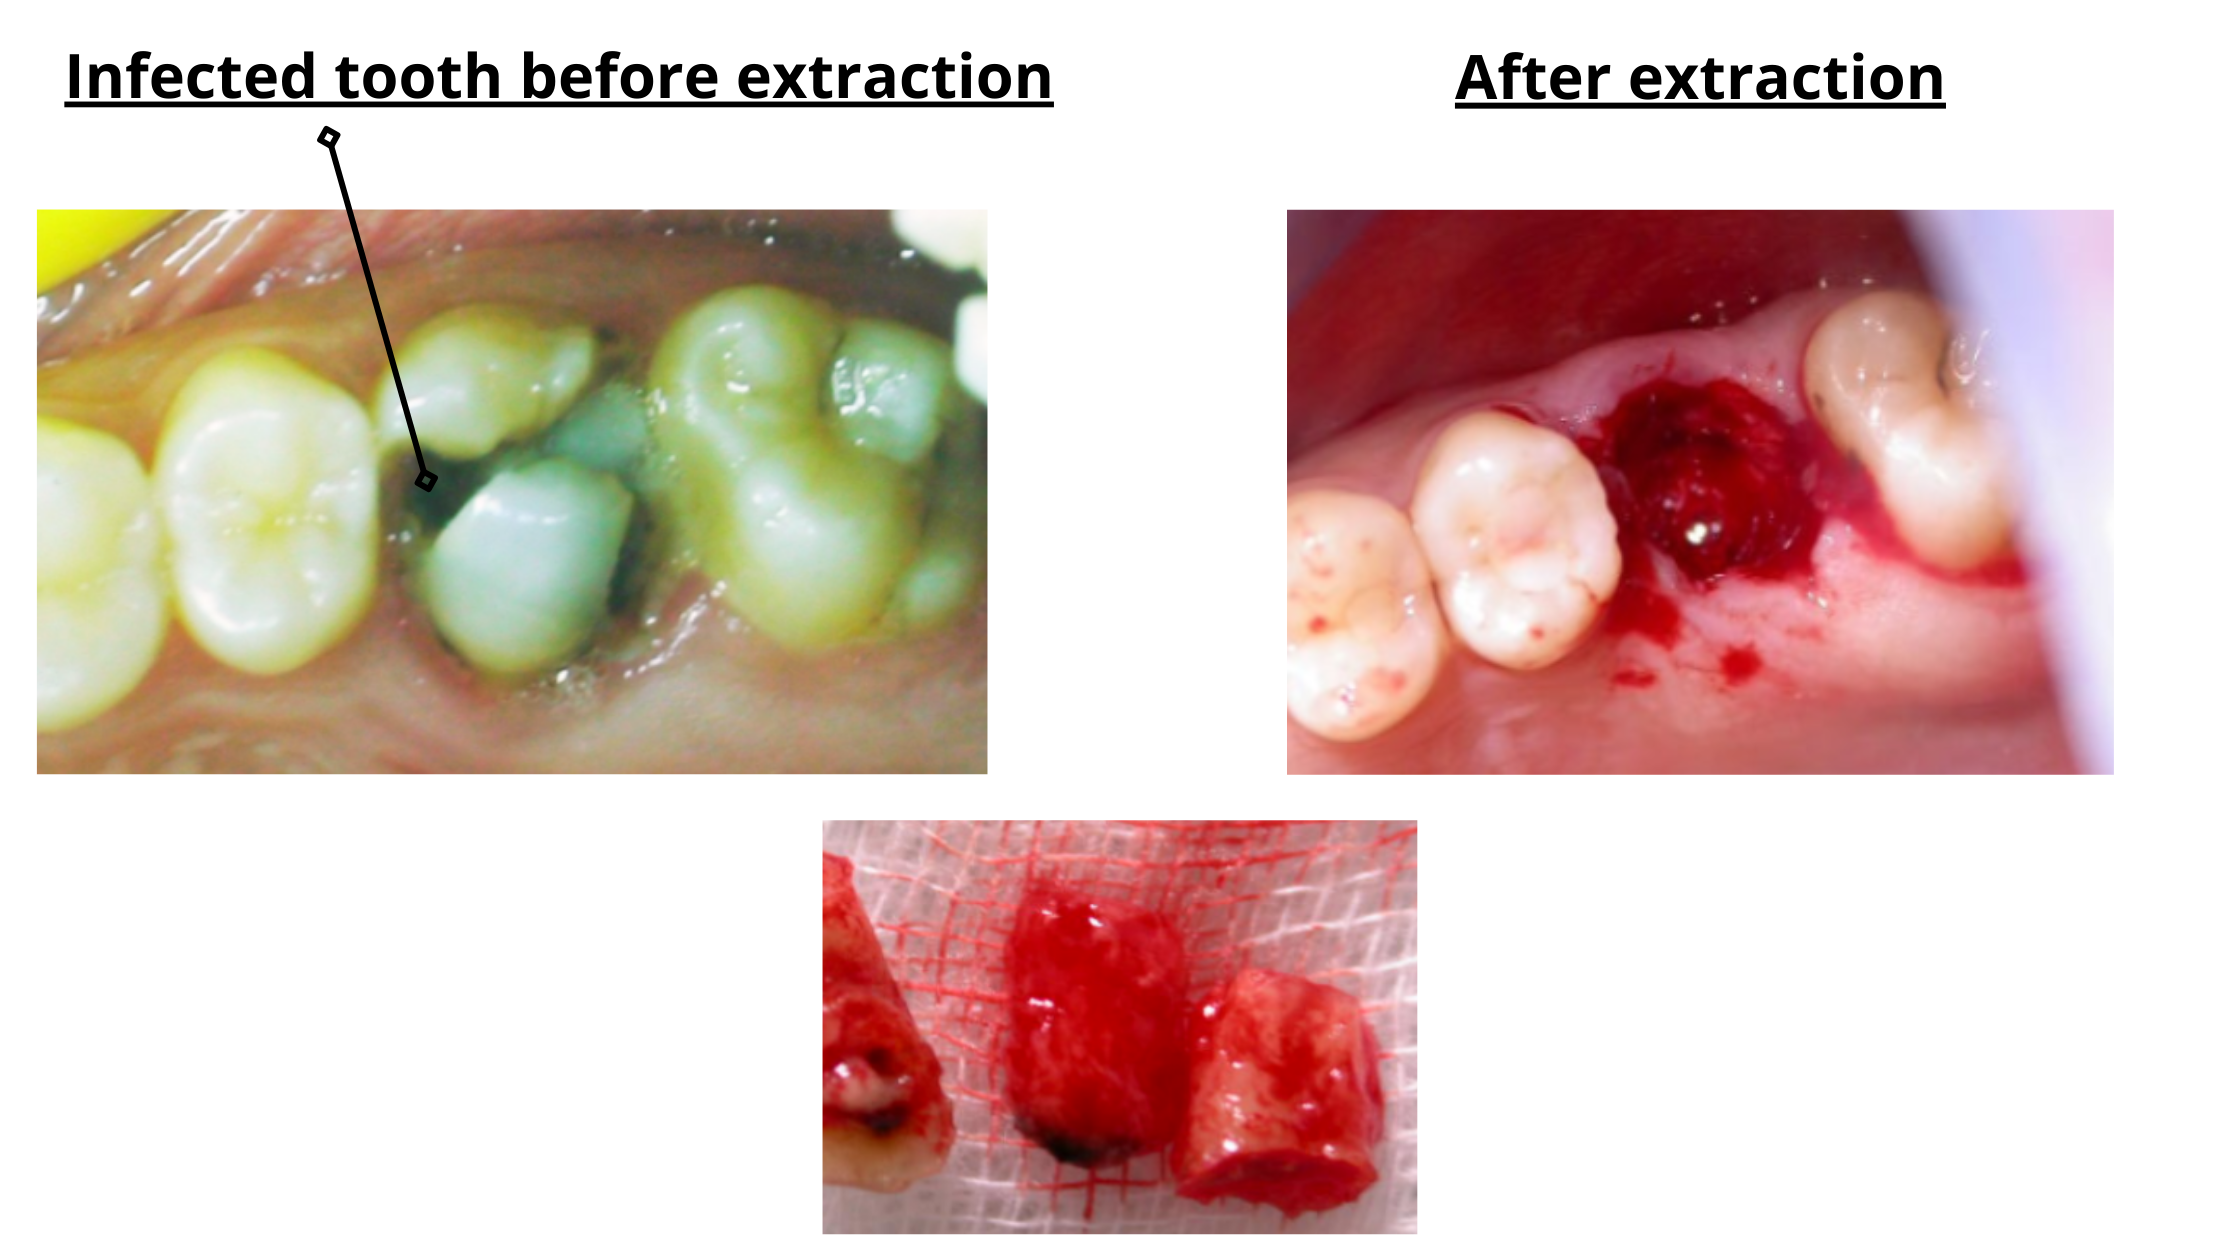 clinical images of infected tooth extraction using tooth sectioning technique: Before and After